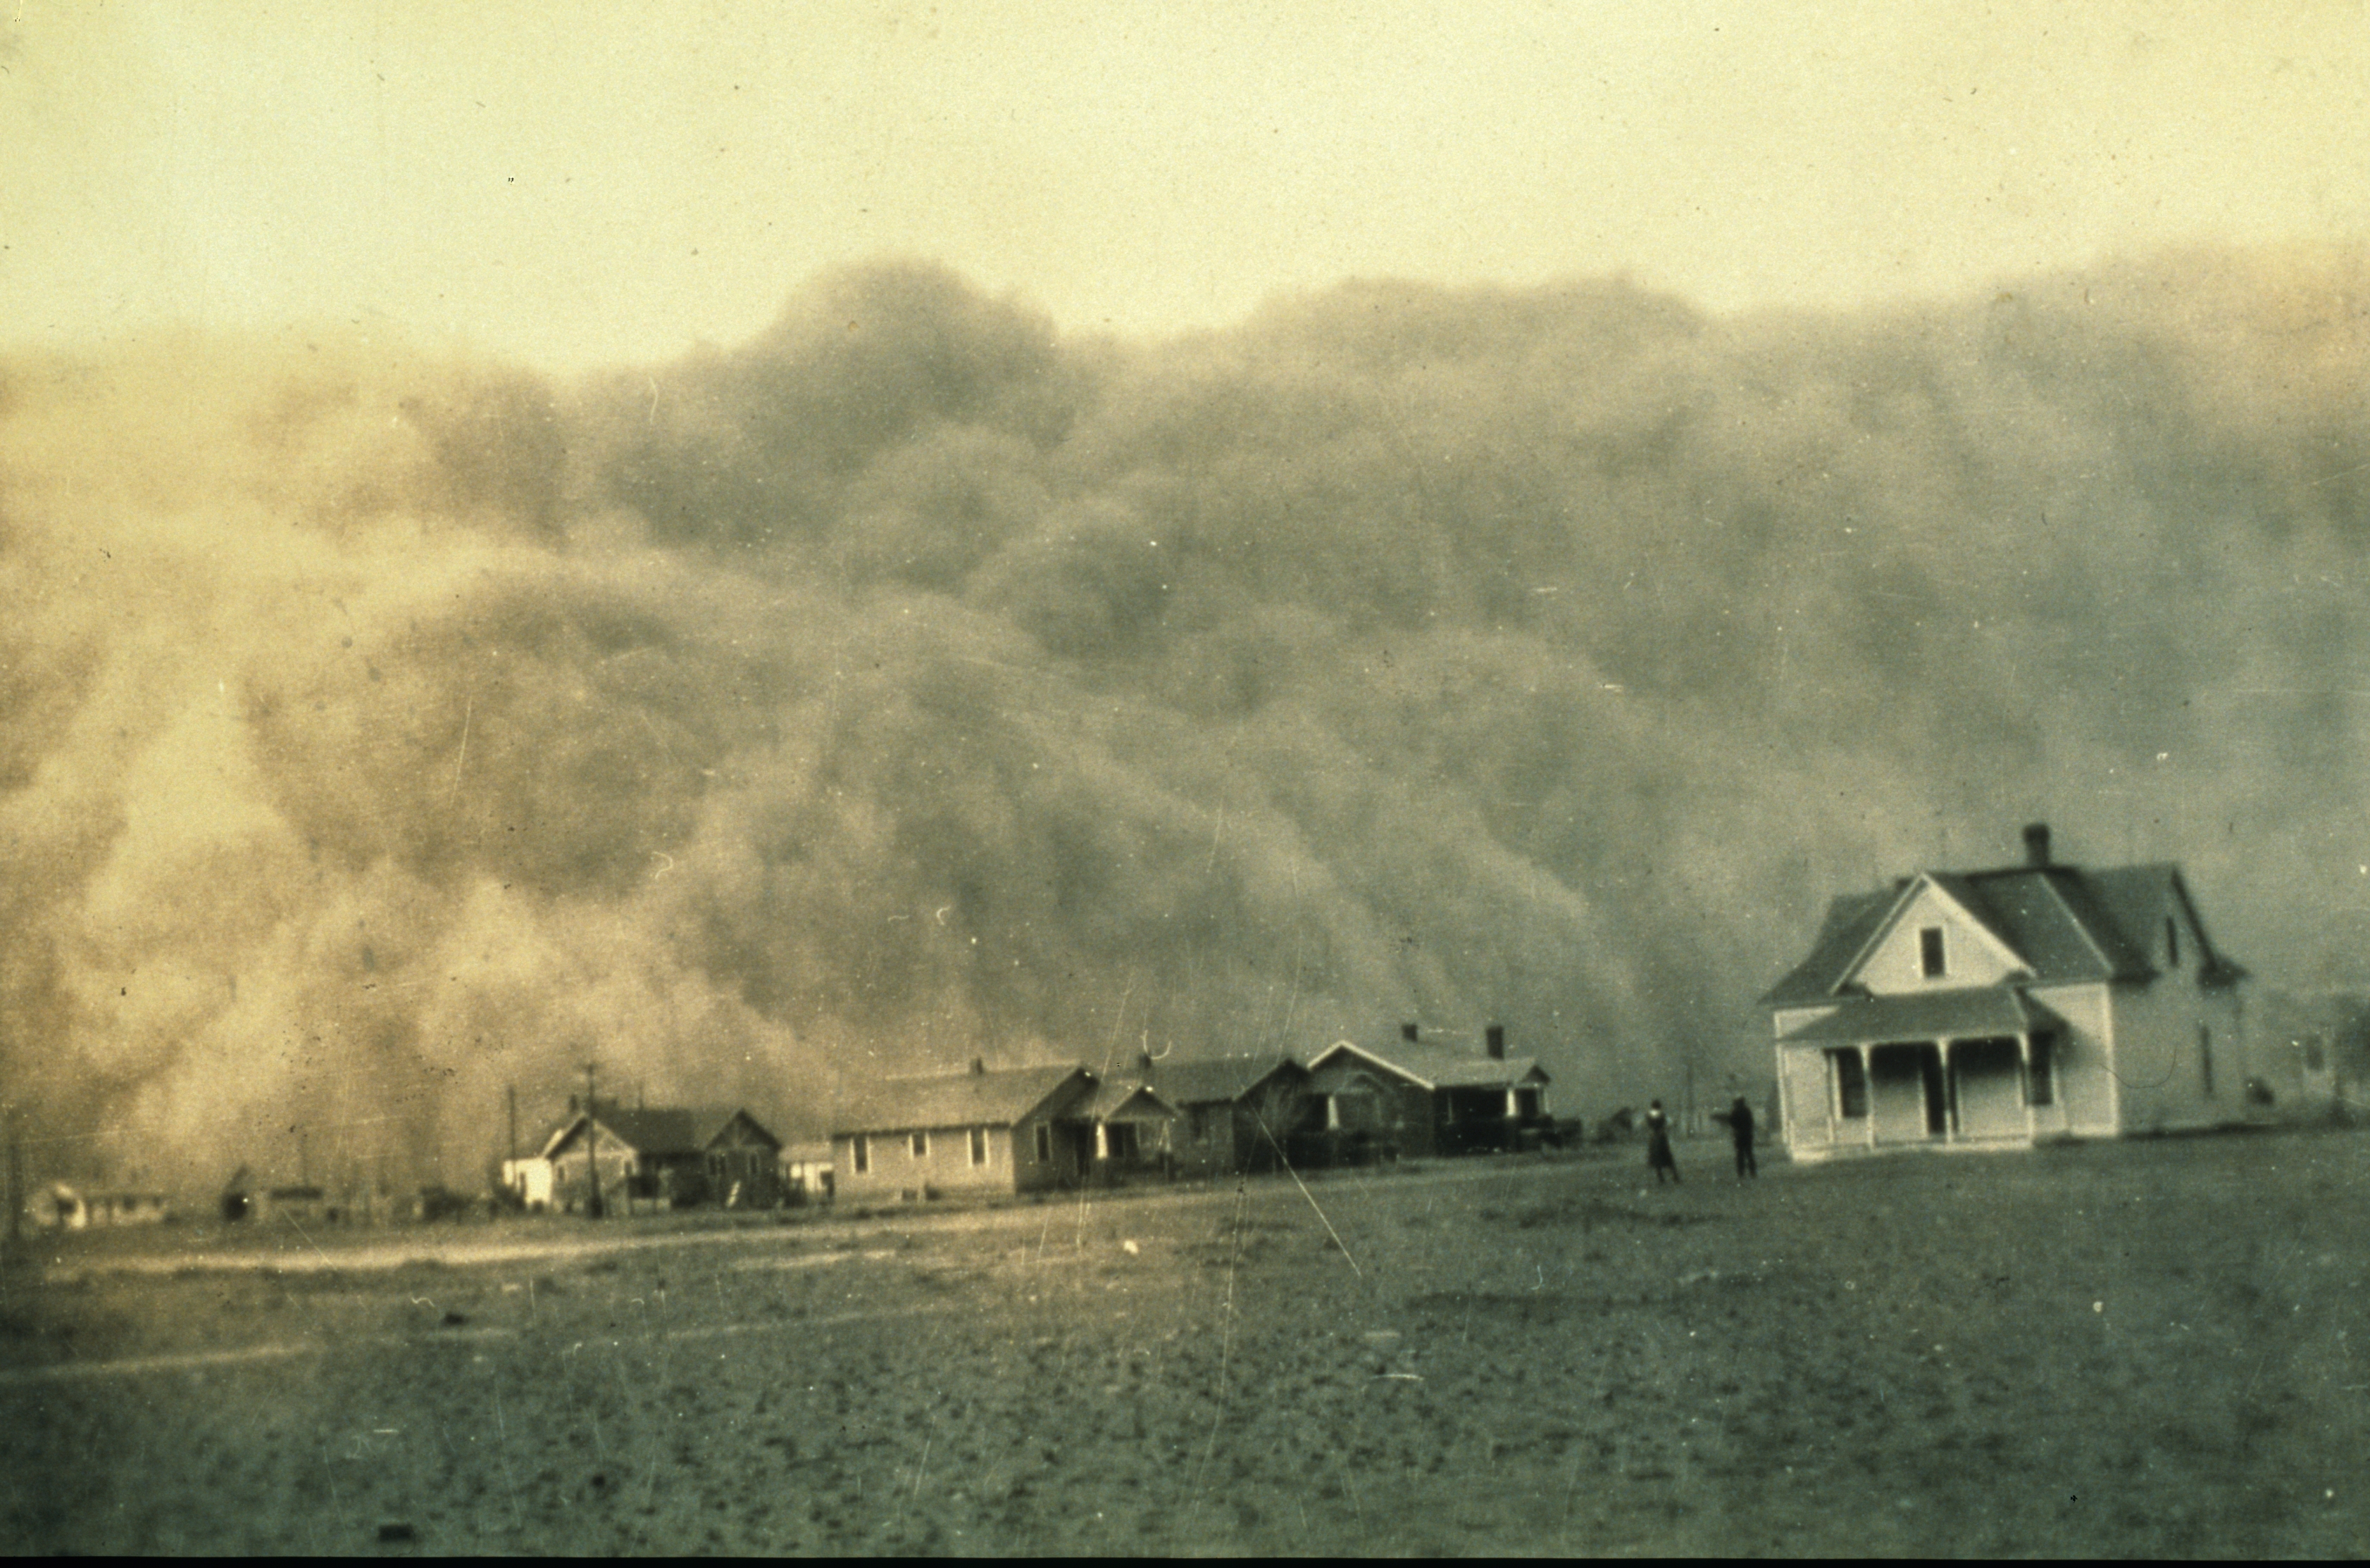 The 1930s 'Dust Bowl' drought over the central and northern Plains states was caused by sustained drought conditions compounded by years of land management practices that left topsoil susceptible to the forces of the wind. 